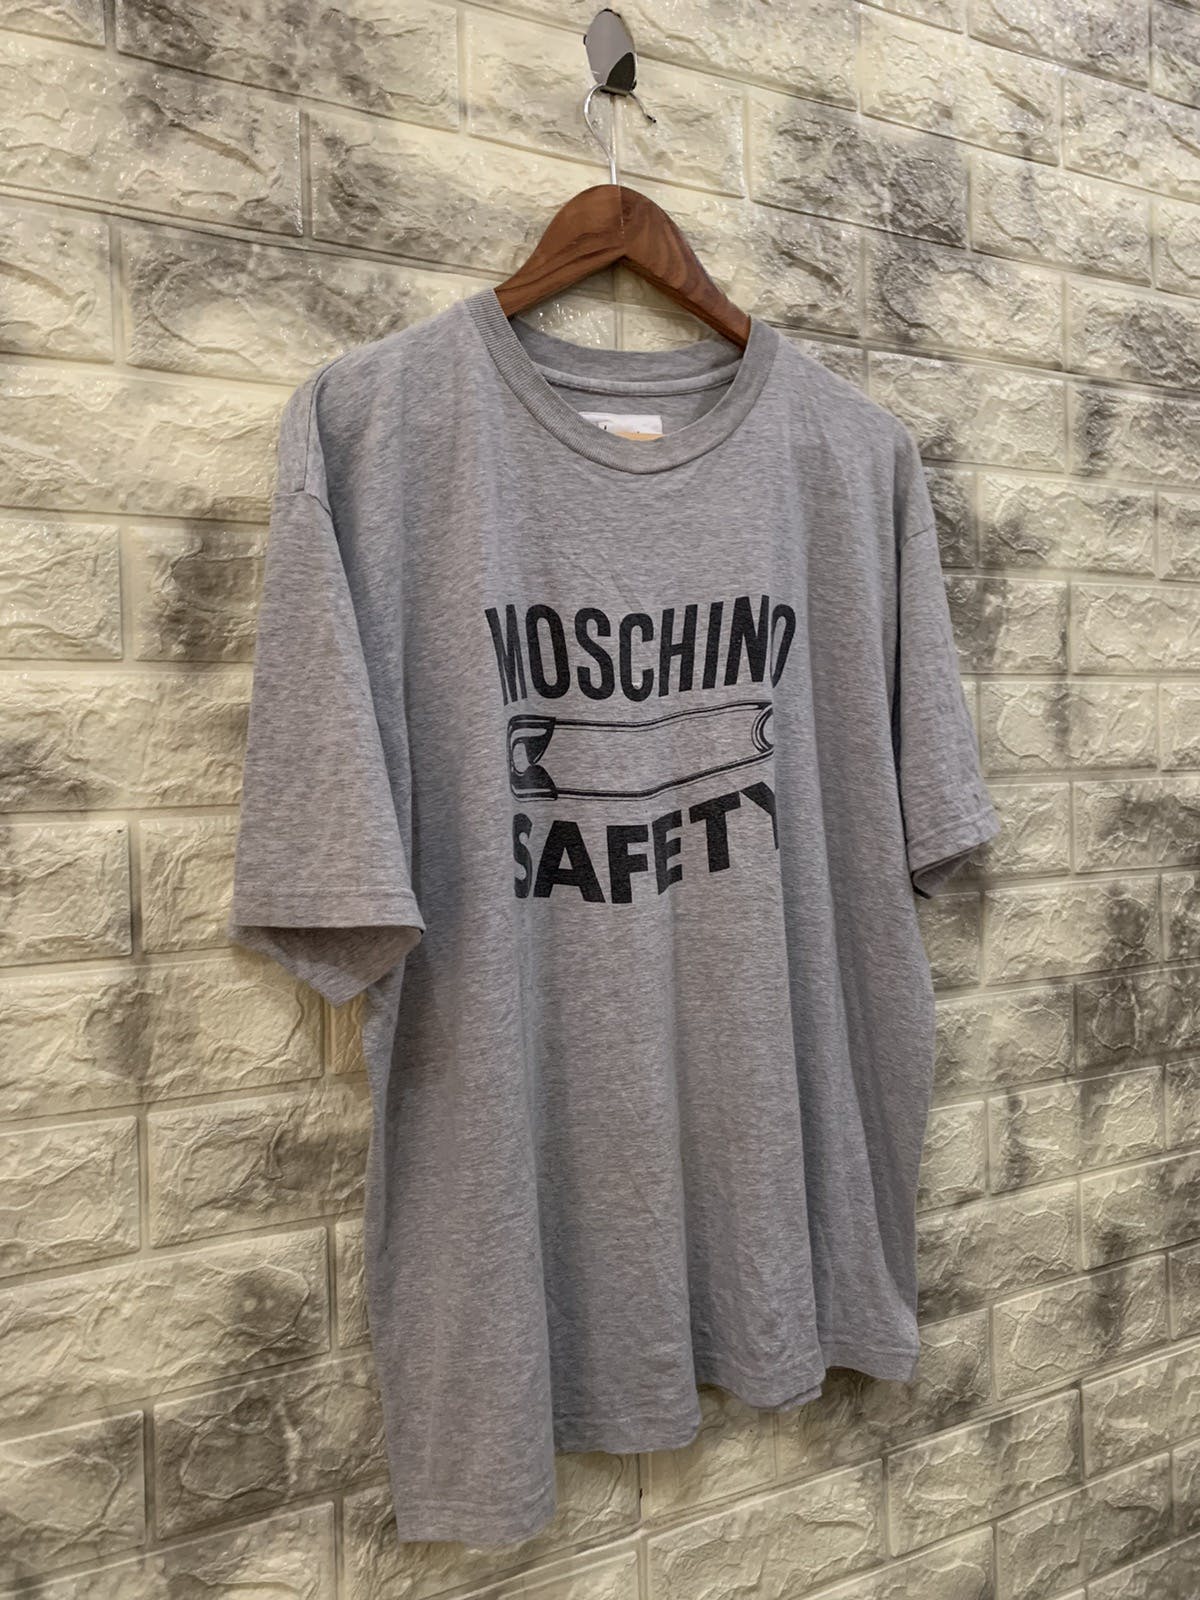 Moschino Safety graphic tee - 3